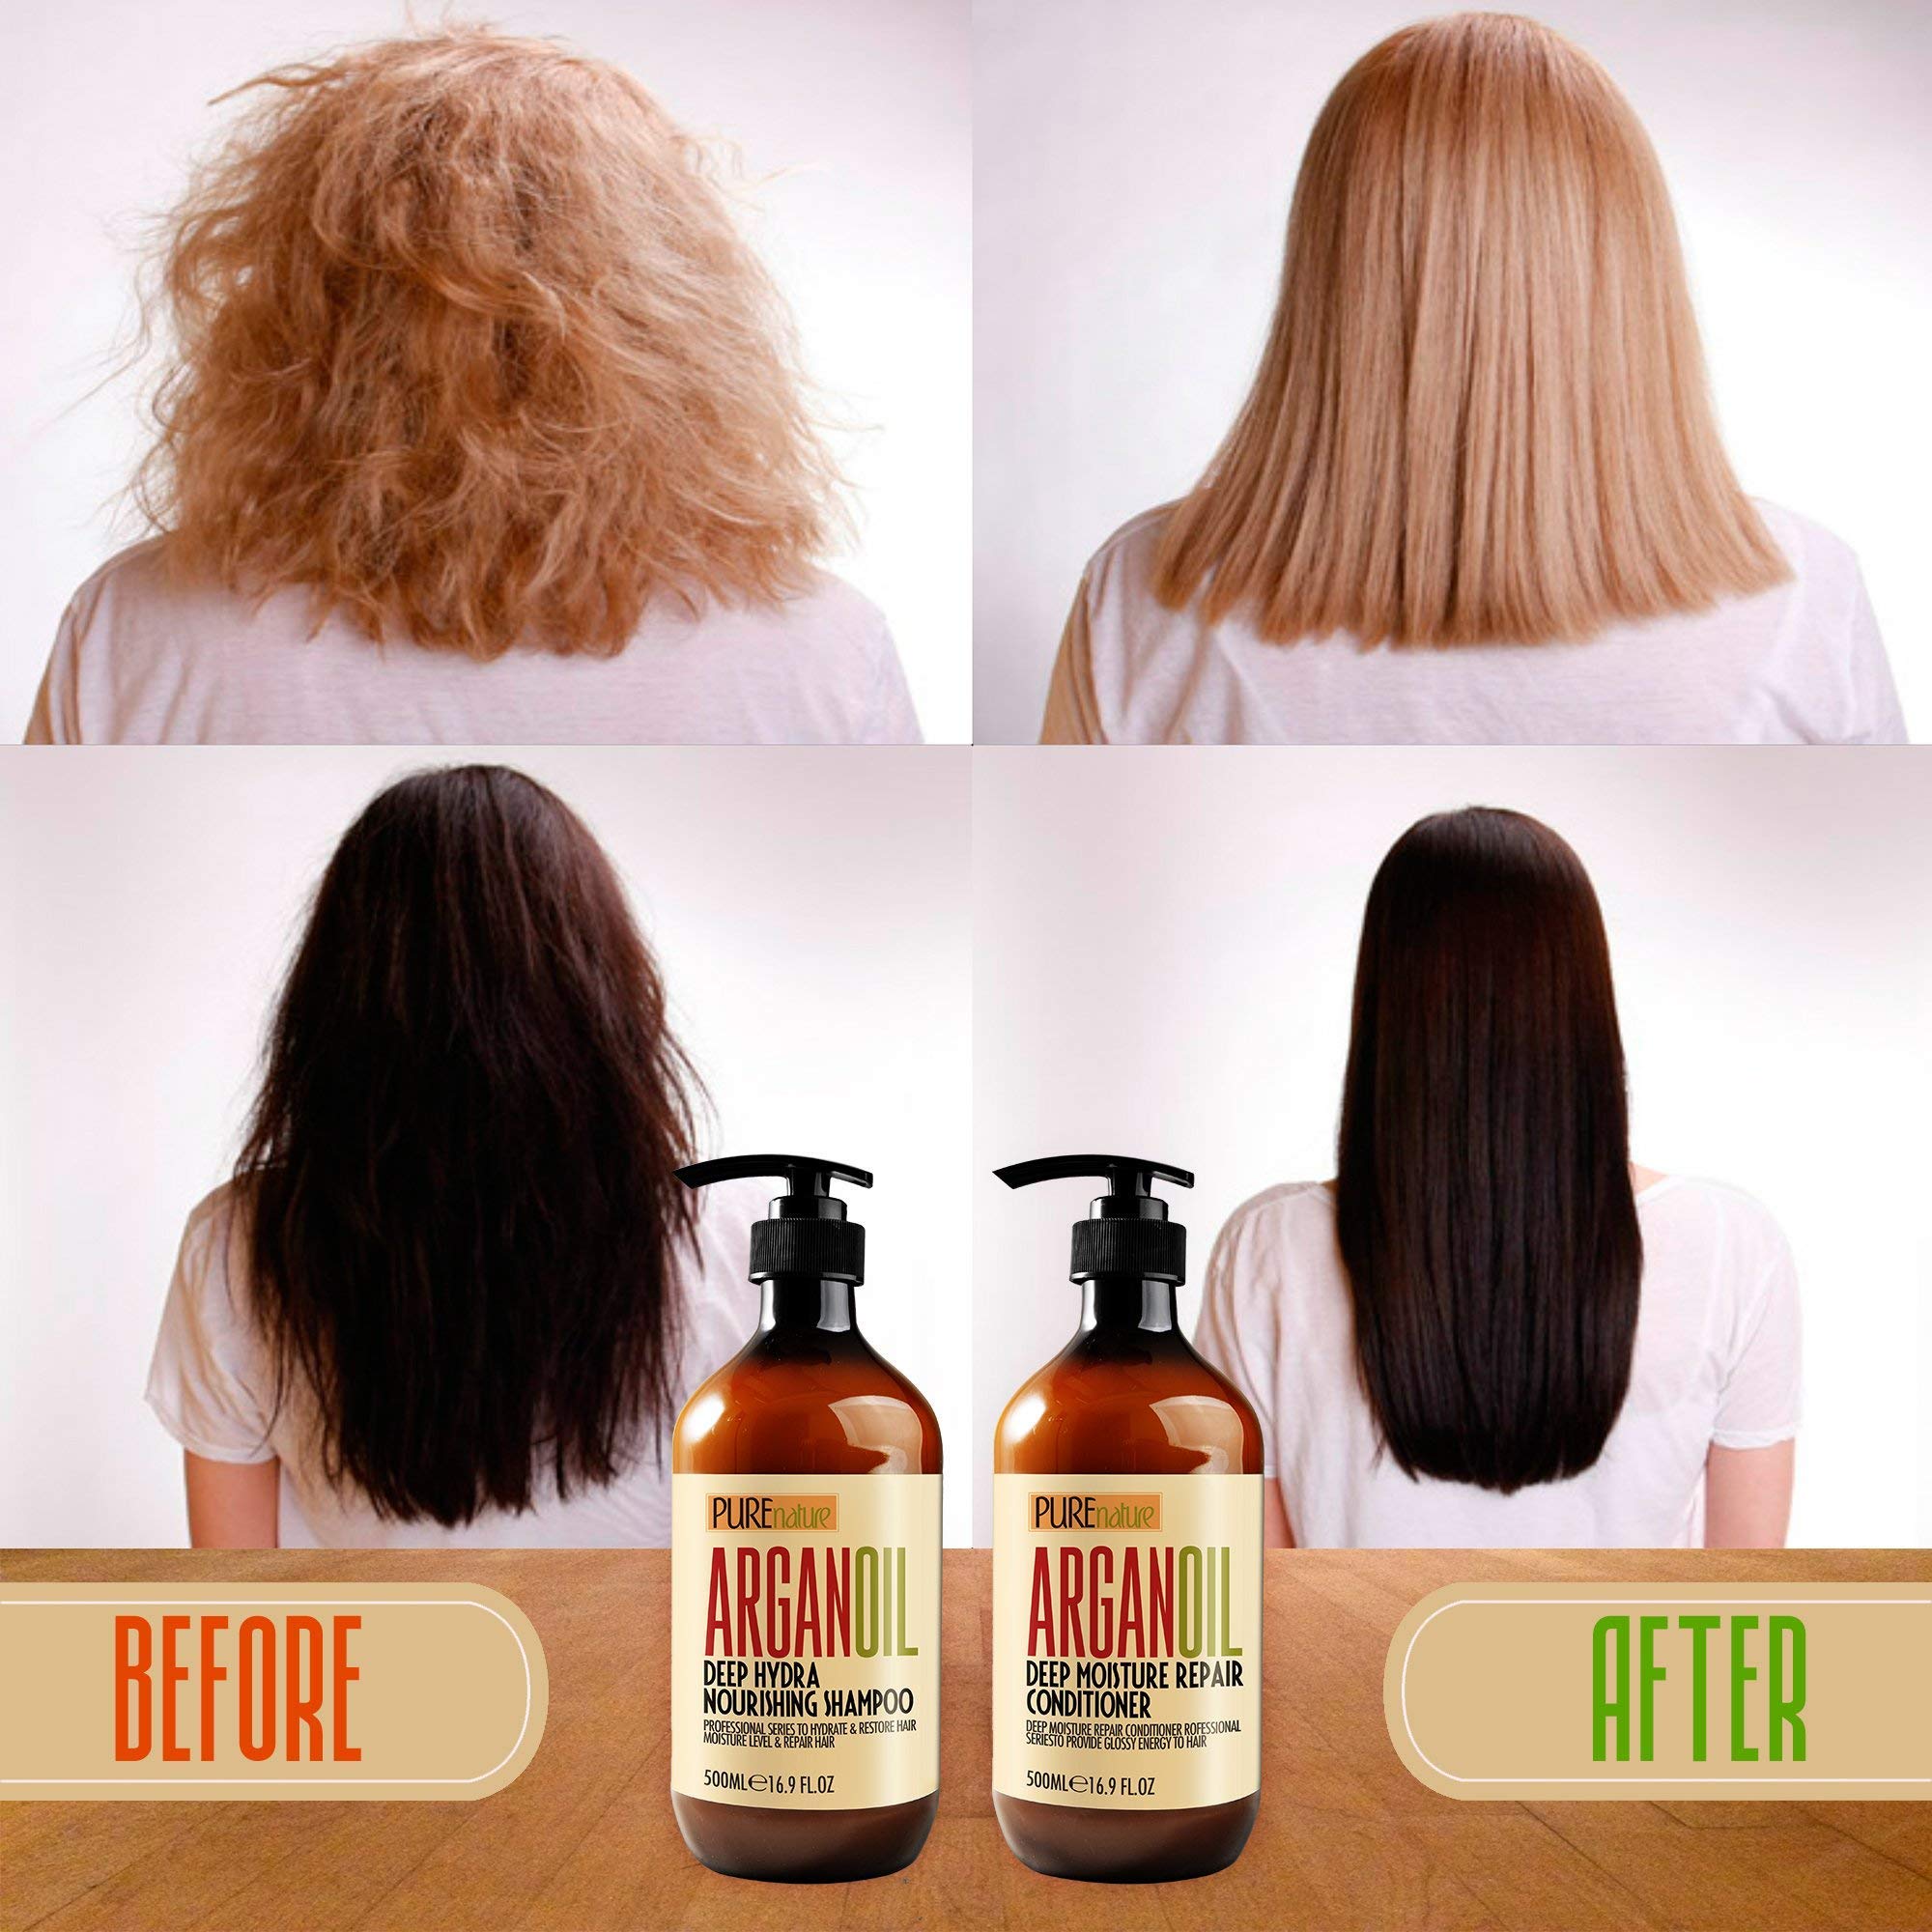 Moroccan Argan Oil Shampoo and Two Conditioners SLS Sulfate Free - Best for Damaged, Dry, Curly or Frizzy Hair - Thickening for Fine / Thin Hair, Safe for Color and Keratin Treated Hair